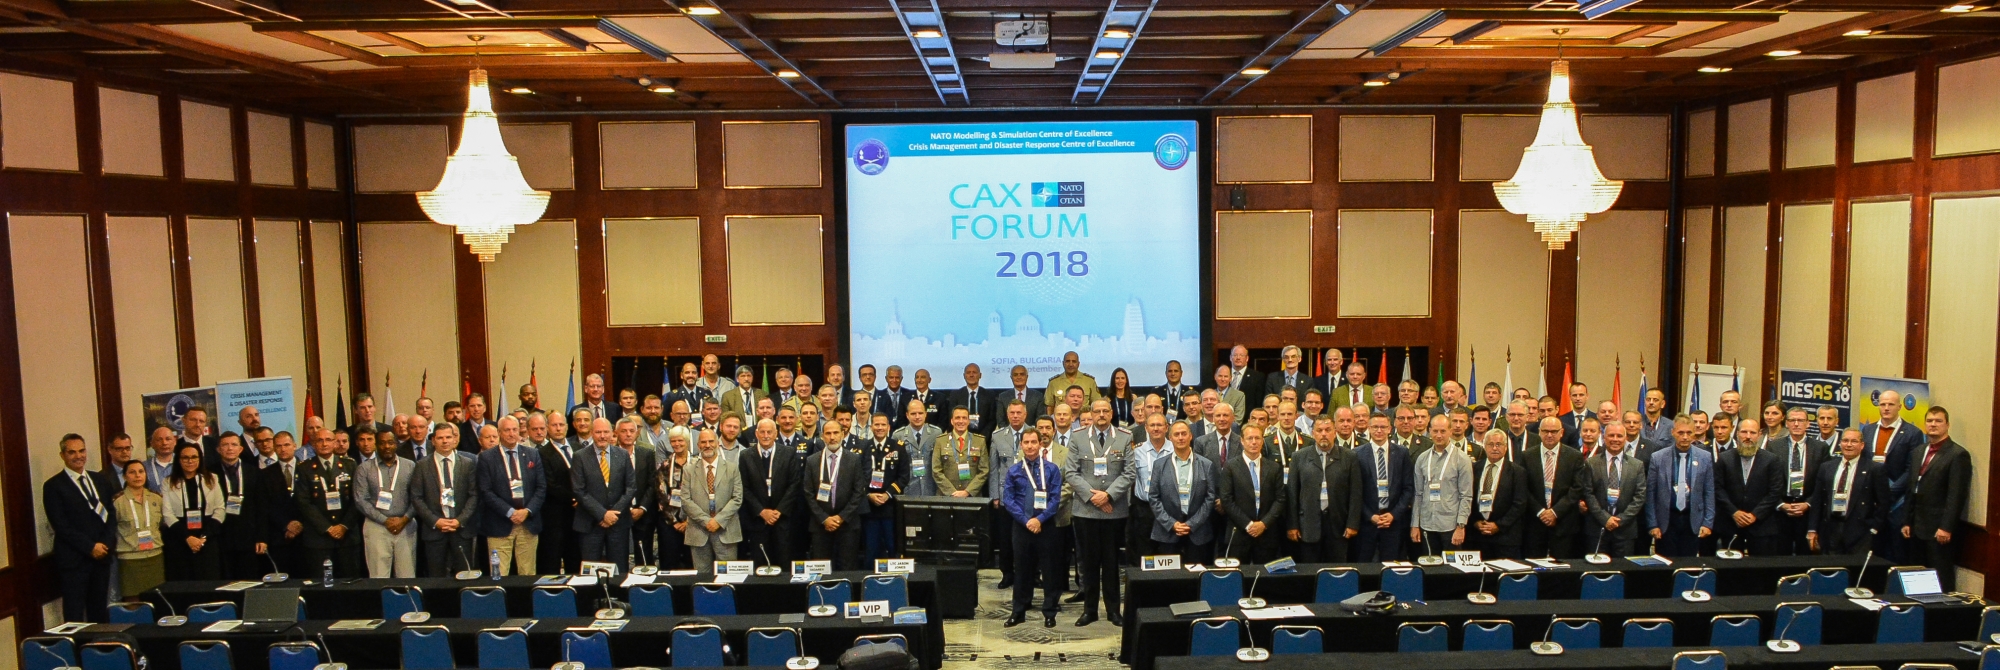 13th NATO Computer Assisted Exercise Forum (NATO CAX Forum 2018)